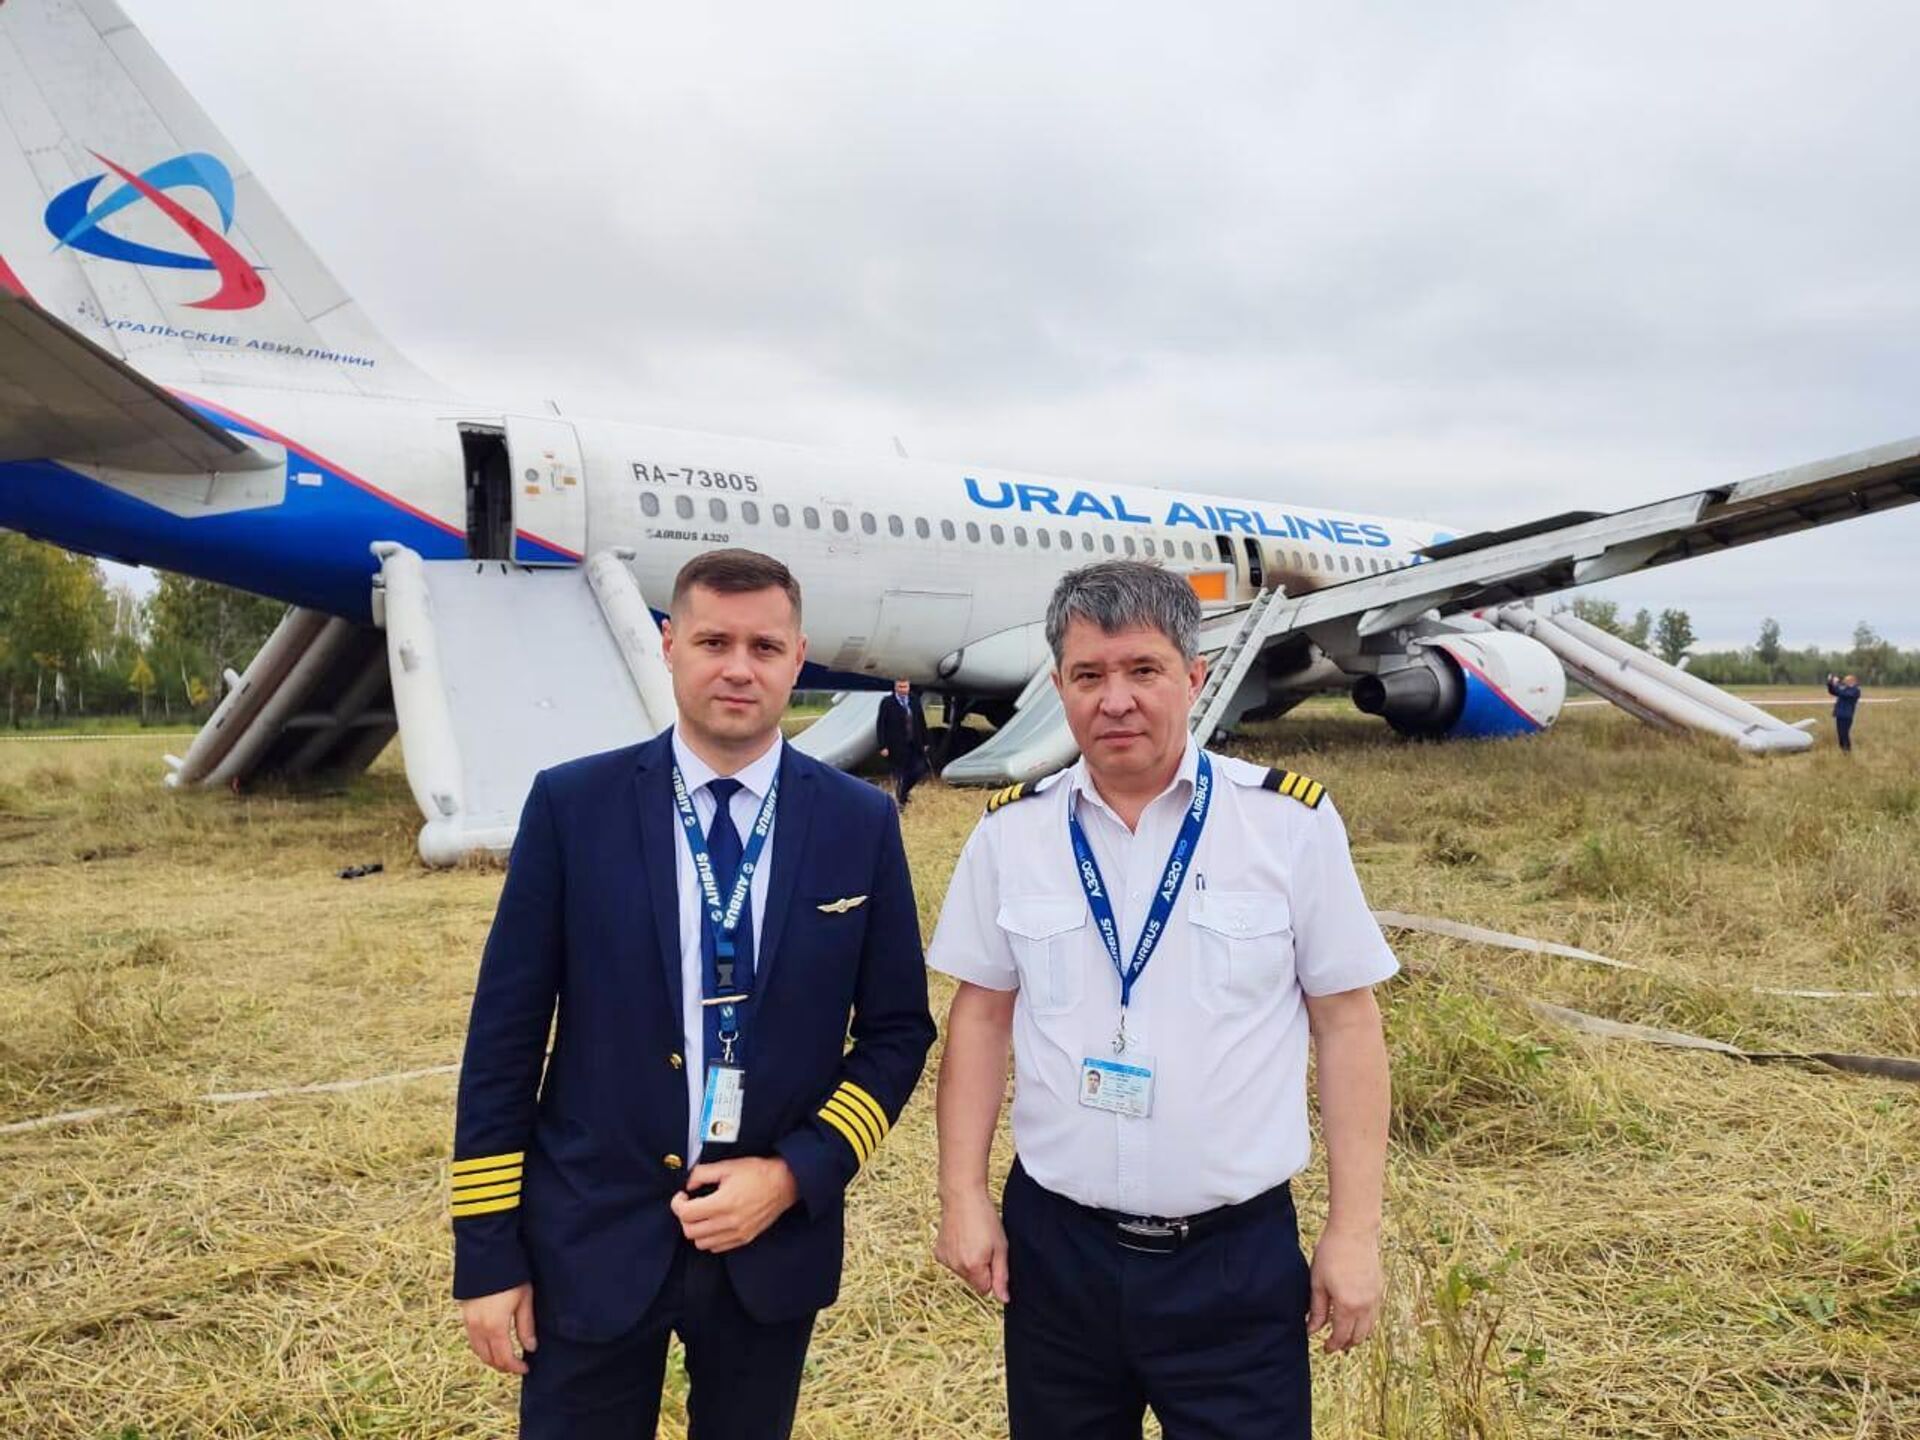 The pilots of the Ural Airlines Airbus which made an emergency touchdown in a wheat field in Novosibirsk region after a hydraulic failure. Flight commander Sergei Belov (left) and second pilot Eduard Semyonov (right). - Sputnik International, 1920, 12.09.2023